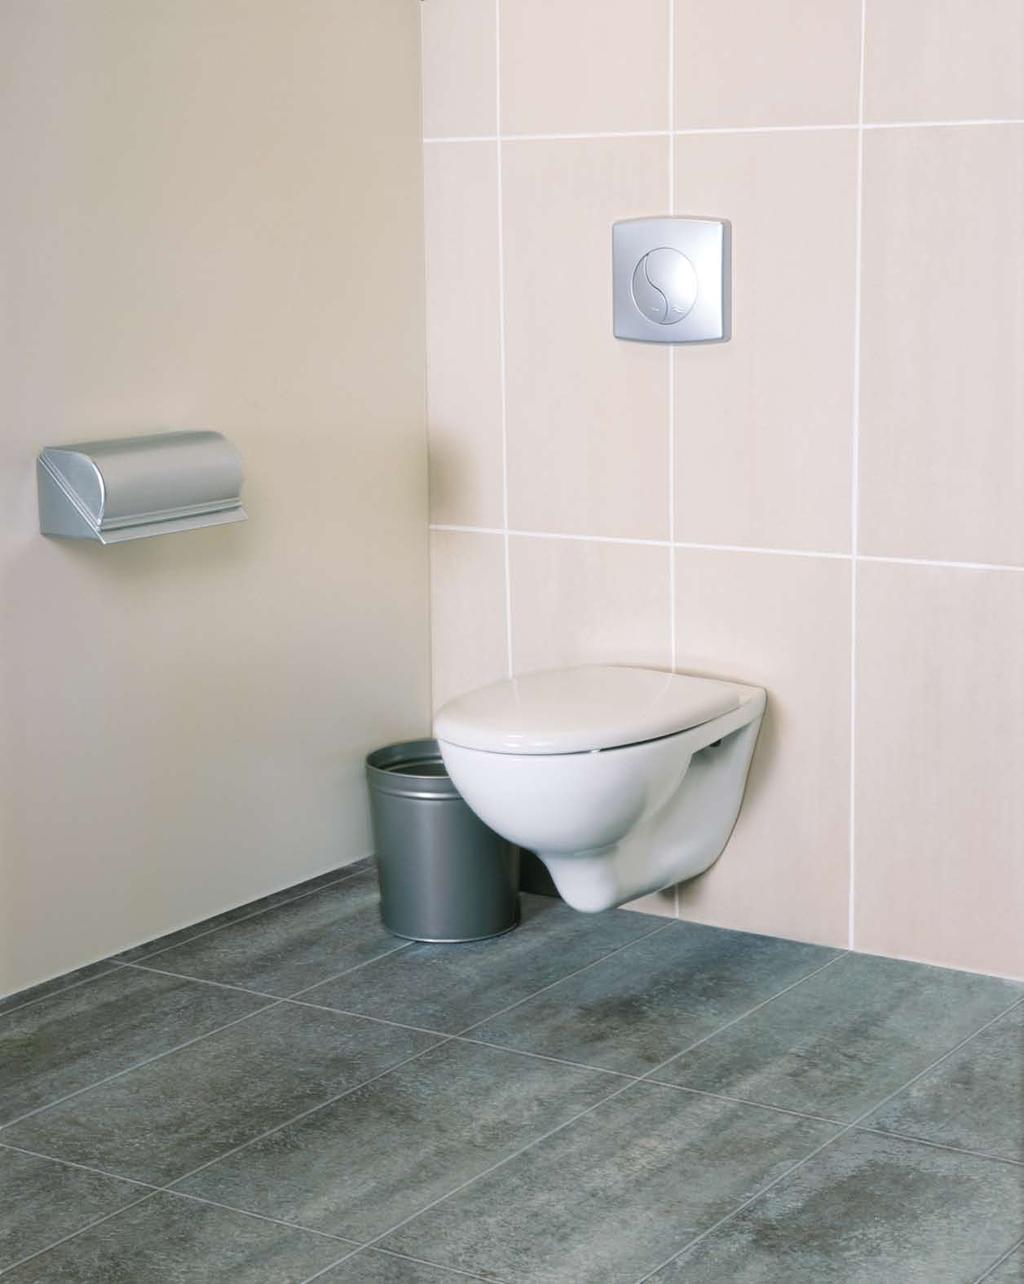 WCs & URINAL PYRAMIS proposal for construction projects, includes one high pressure WC, one wall-hung WC and